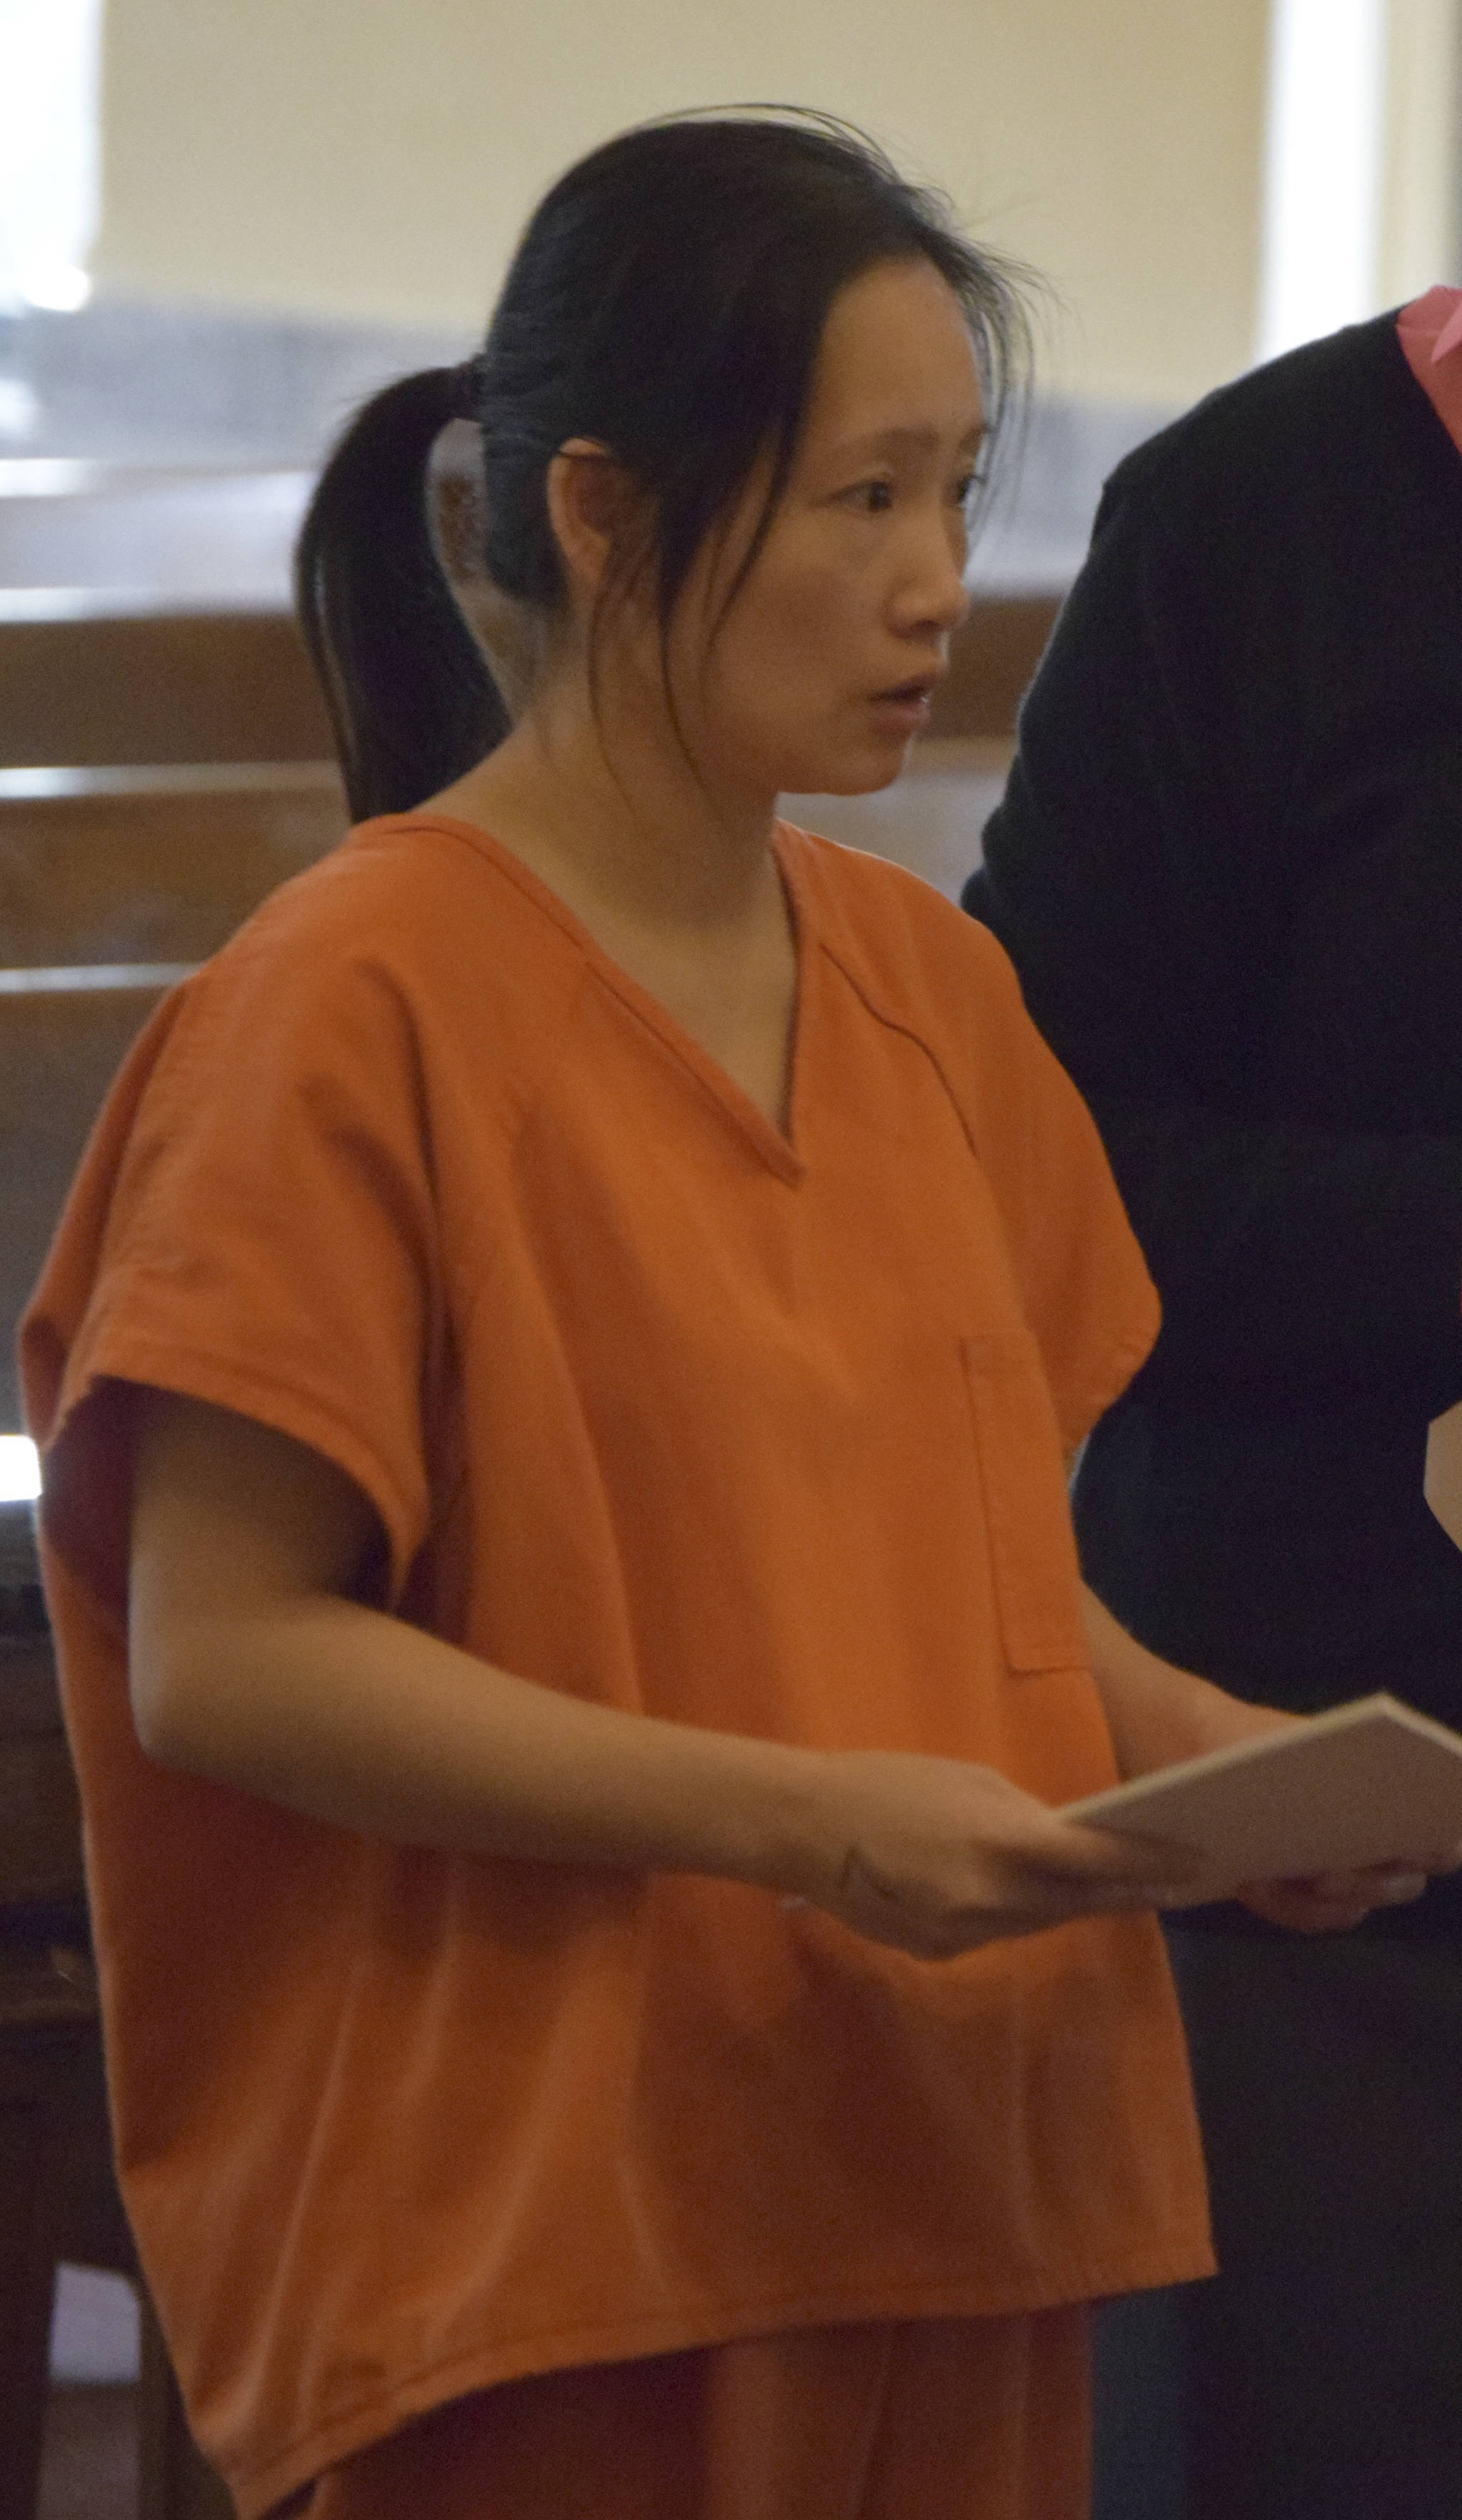 Todd Bennington | The Vidette Yong Juan Wu, 38, in an initial court appearance at the Grays Harbor County Courthouse on Nov. 29.